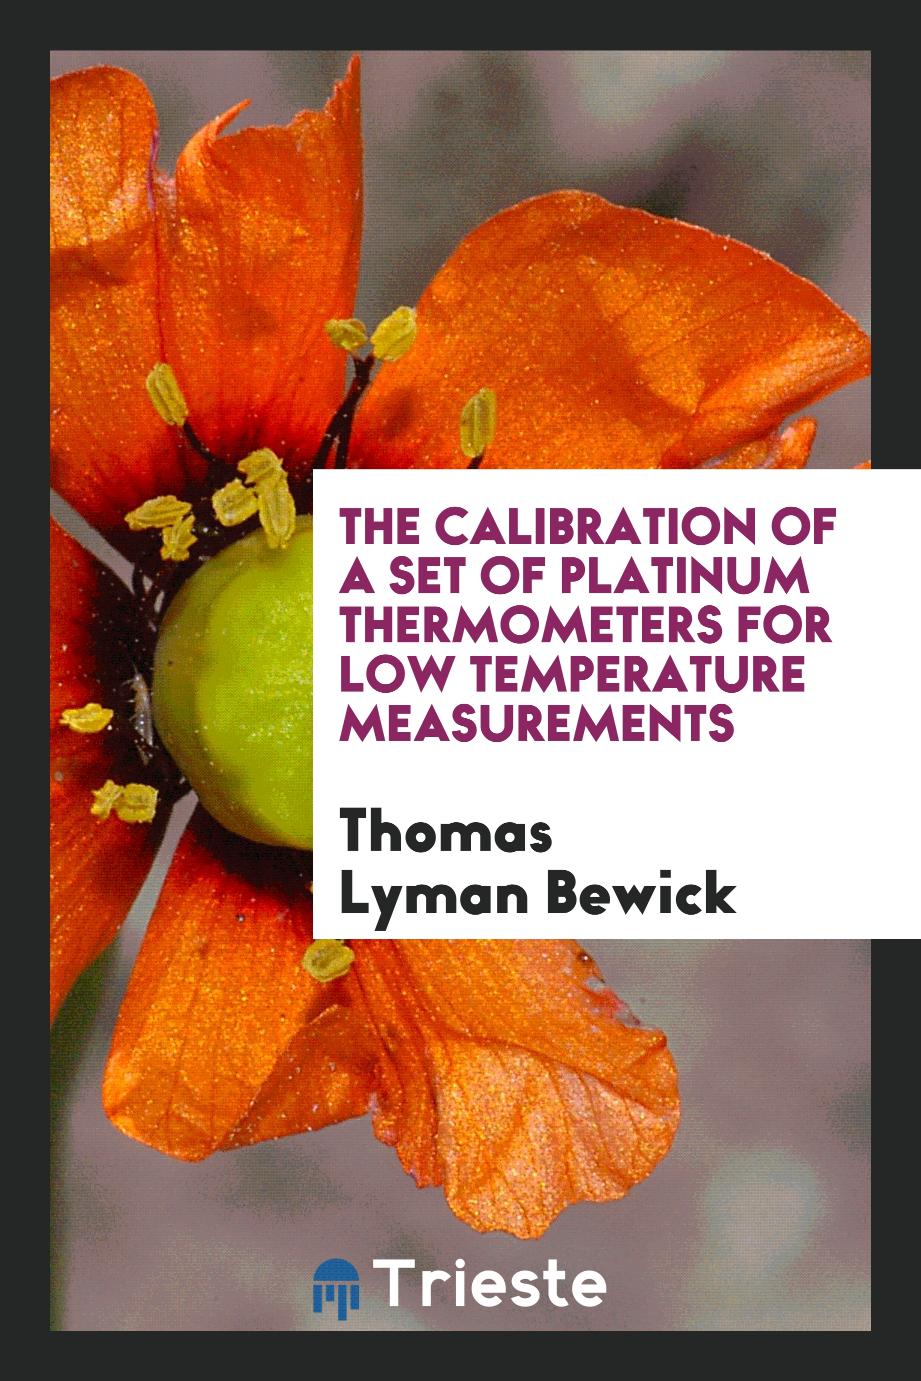 The calibration of a set of platinum thermometers for low temperature measurements